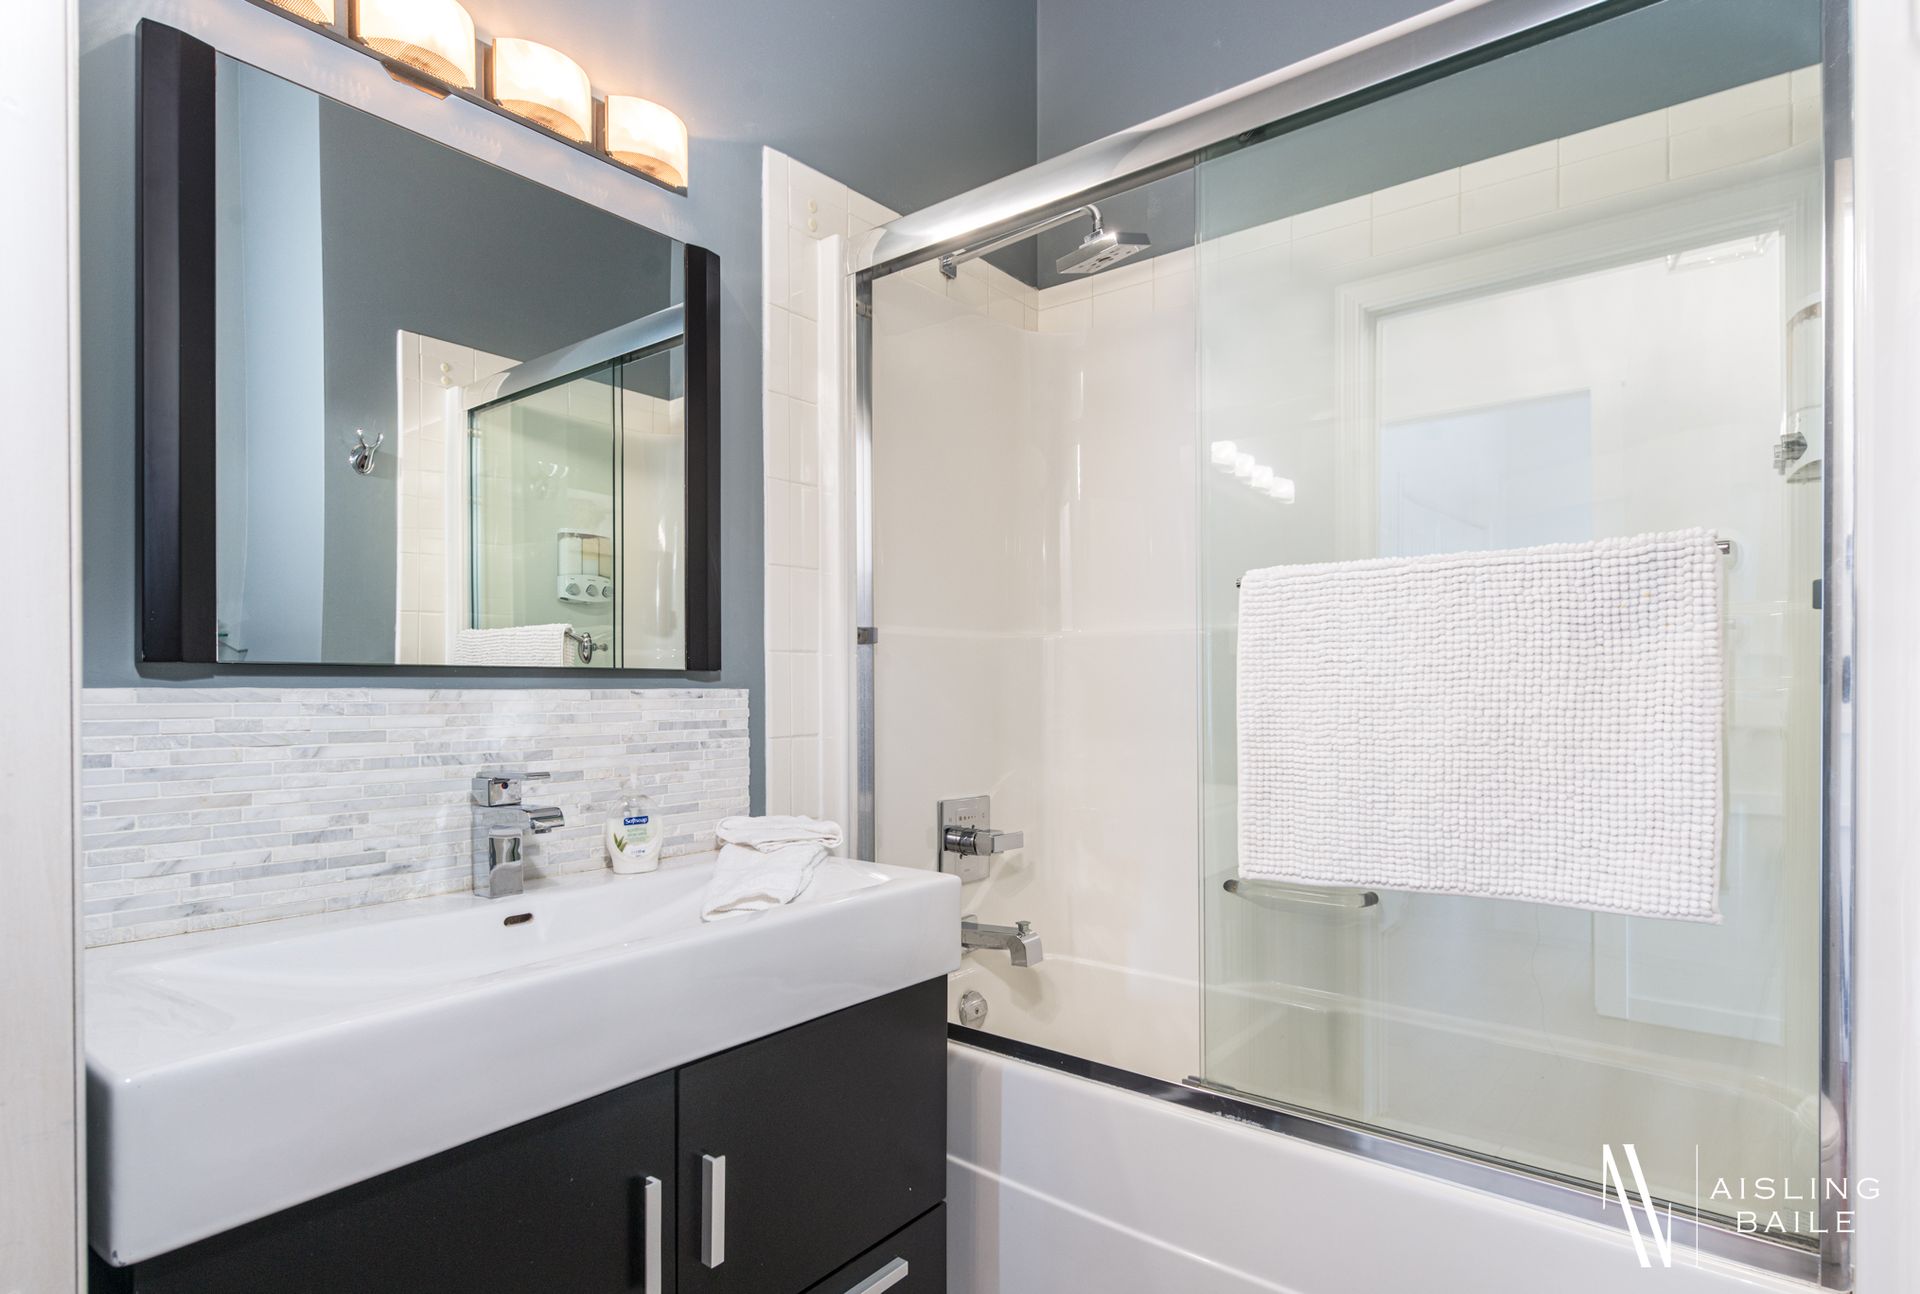 Second full bathroom of the Central Elegance, an Invermere BC Vacation Rental hosted by Aisling Baile Property Management.